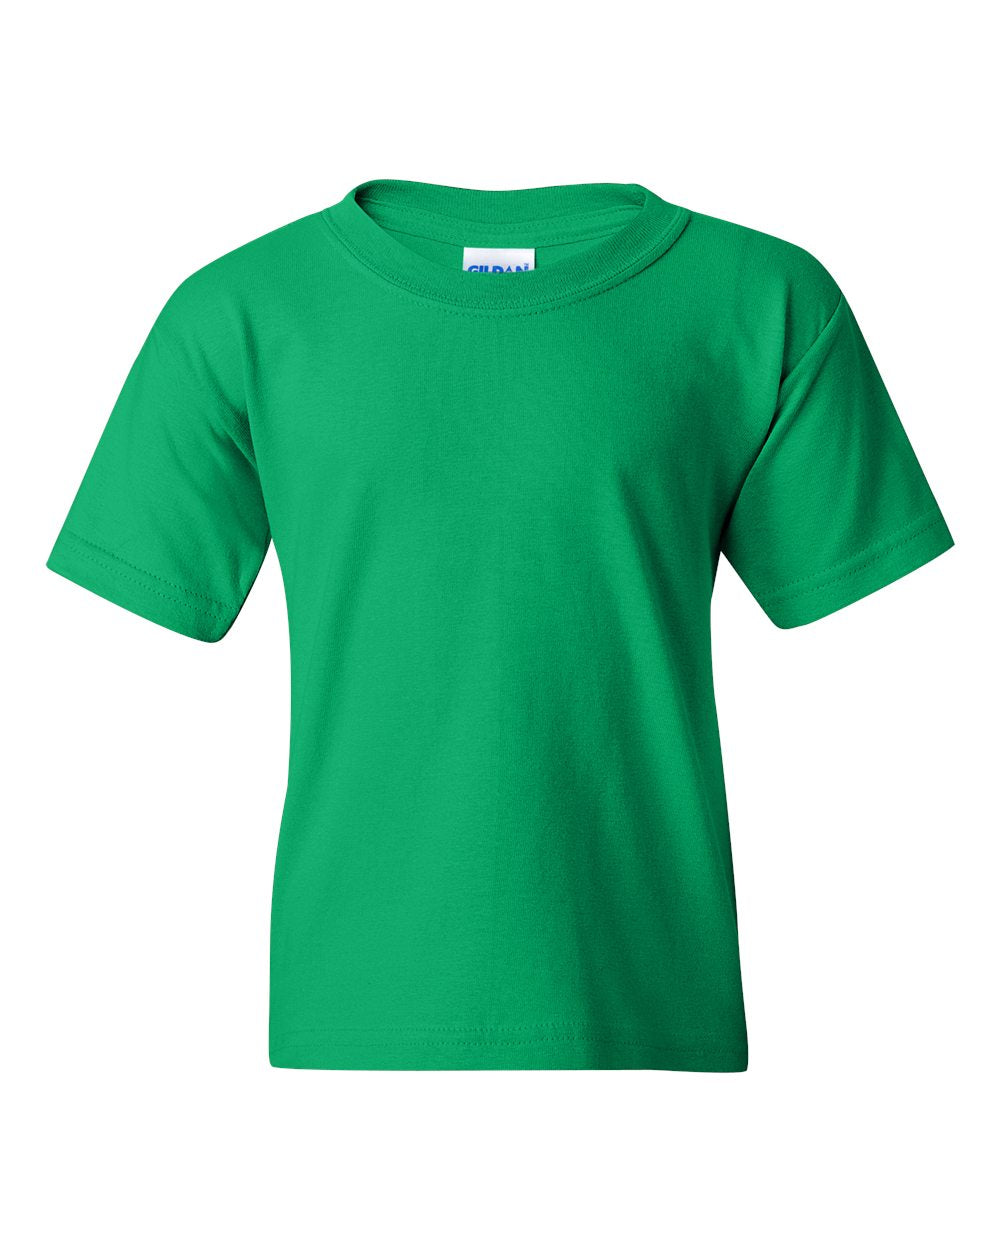 Heavy Cotton™ Youth T-Shirt Child Product 1